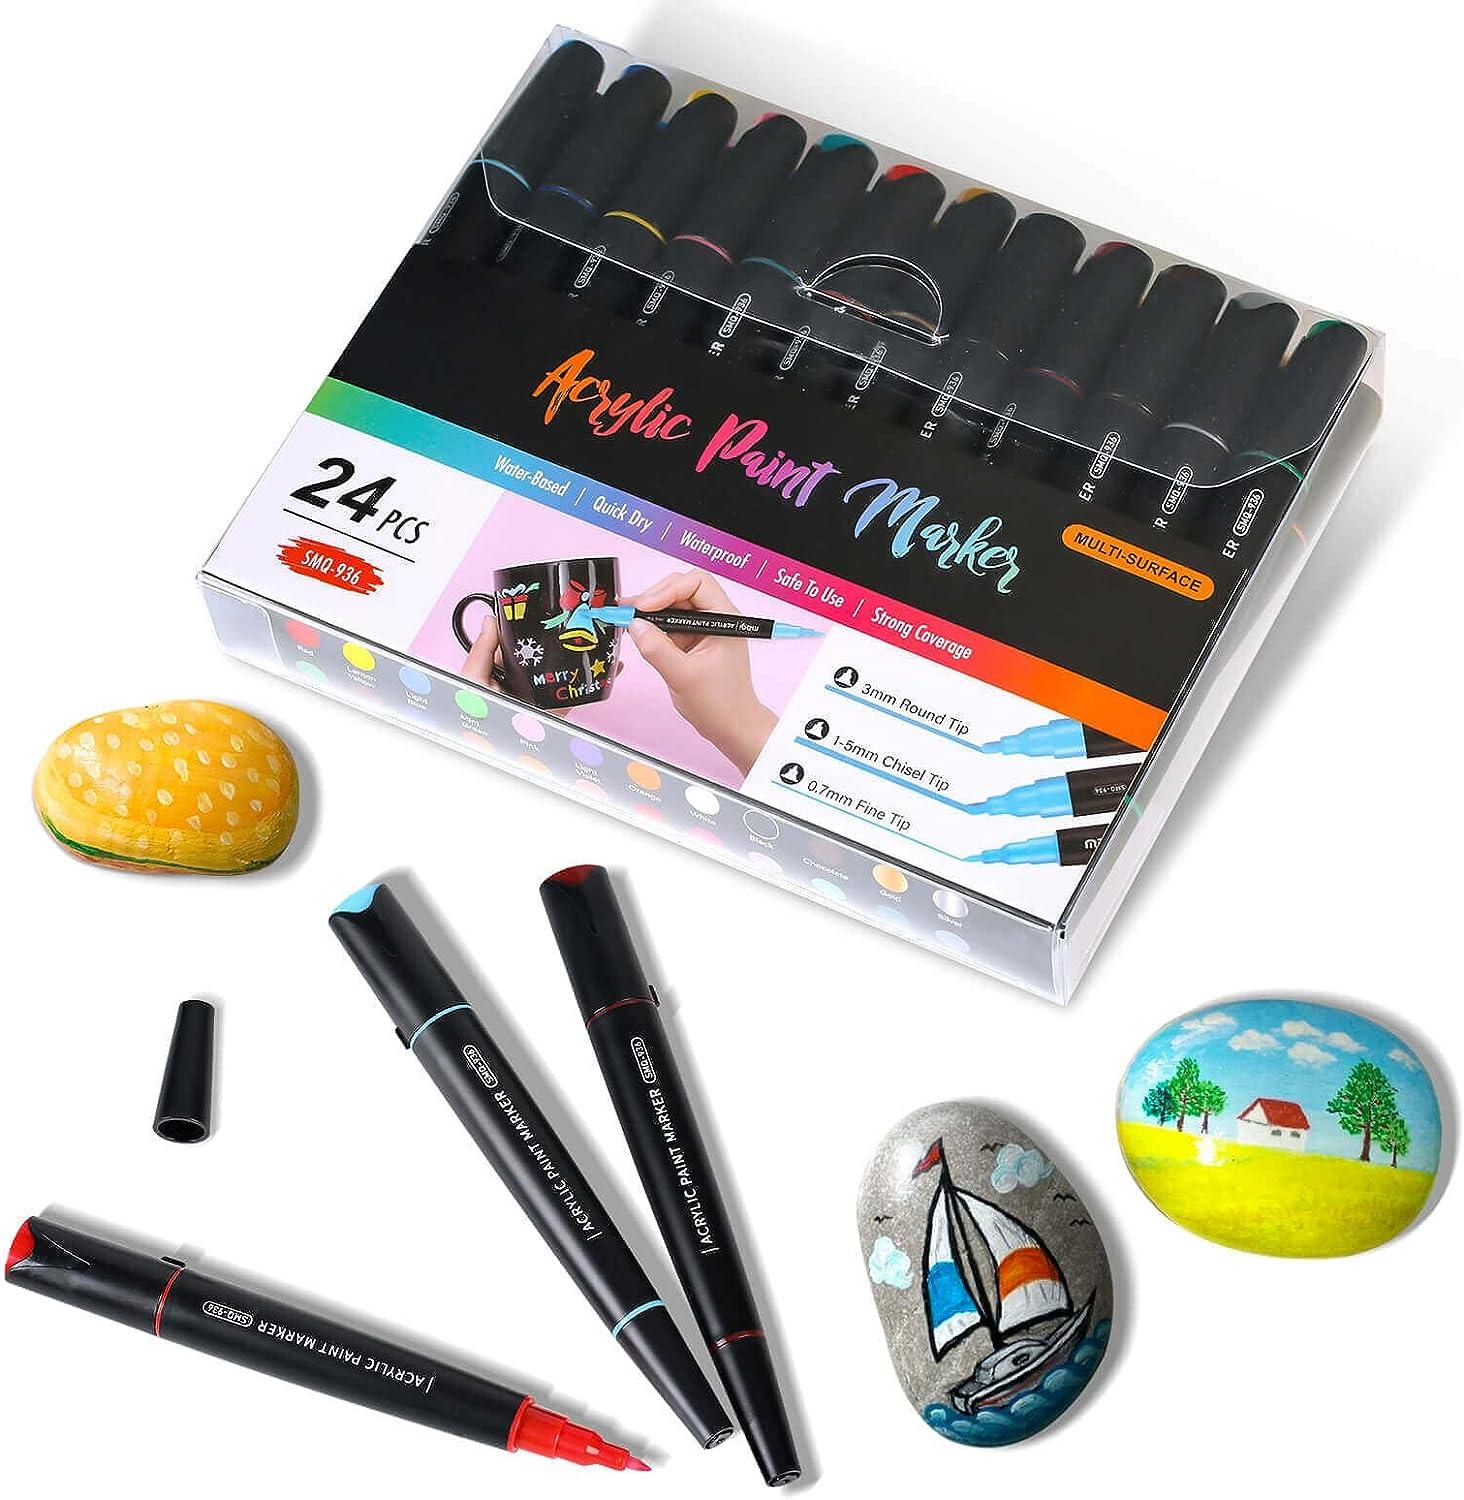 100 Colors Marker Pens, Double Point Art Markers Set, Fine and Broad Tip  Sketch Pen, for Kids and Adults Painting, Coloring, DIY on Wood, Ceramic